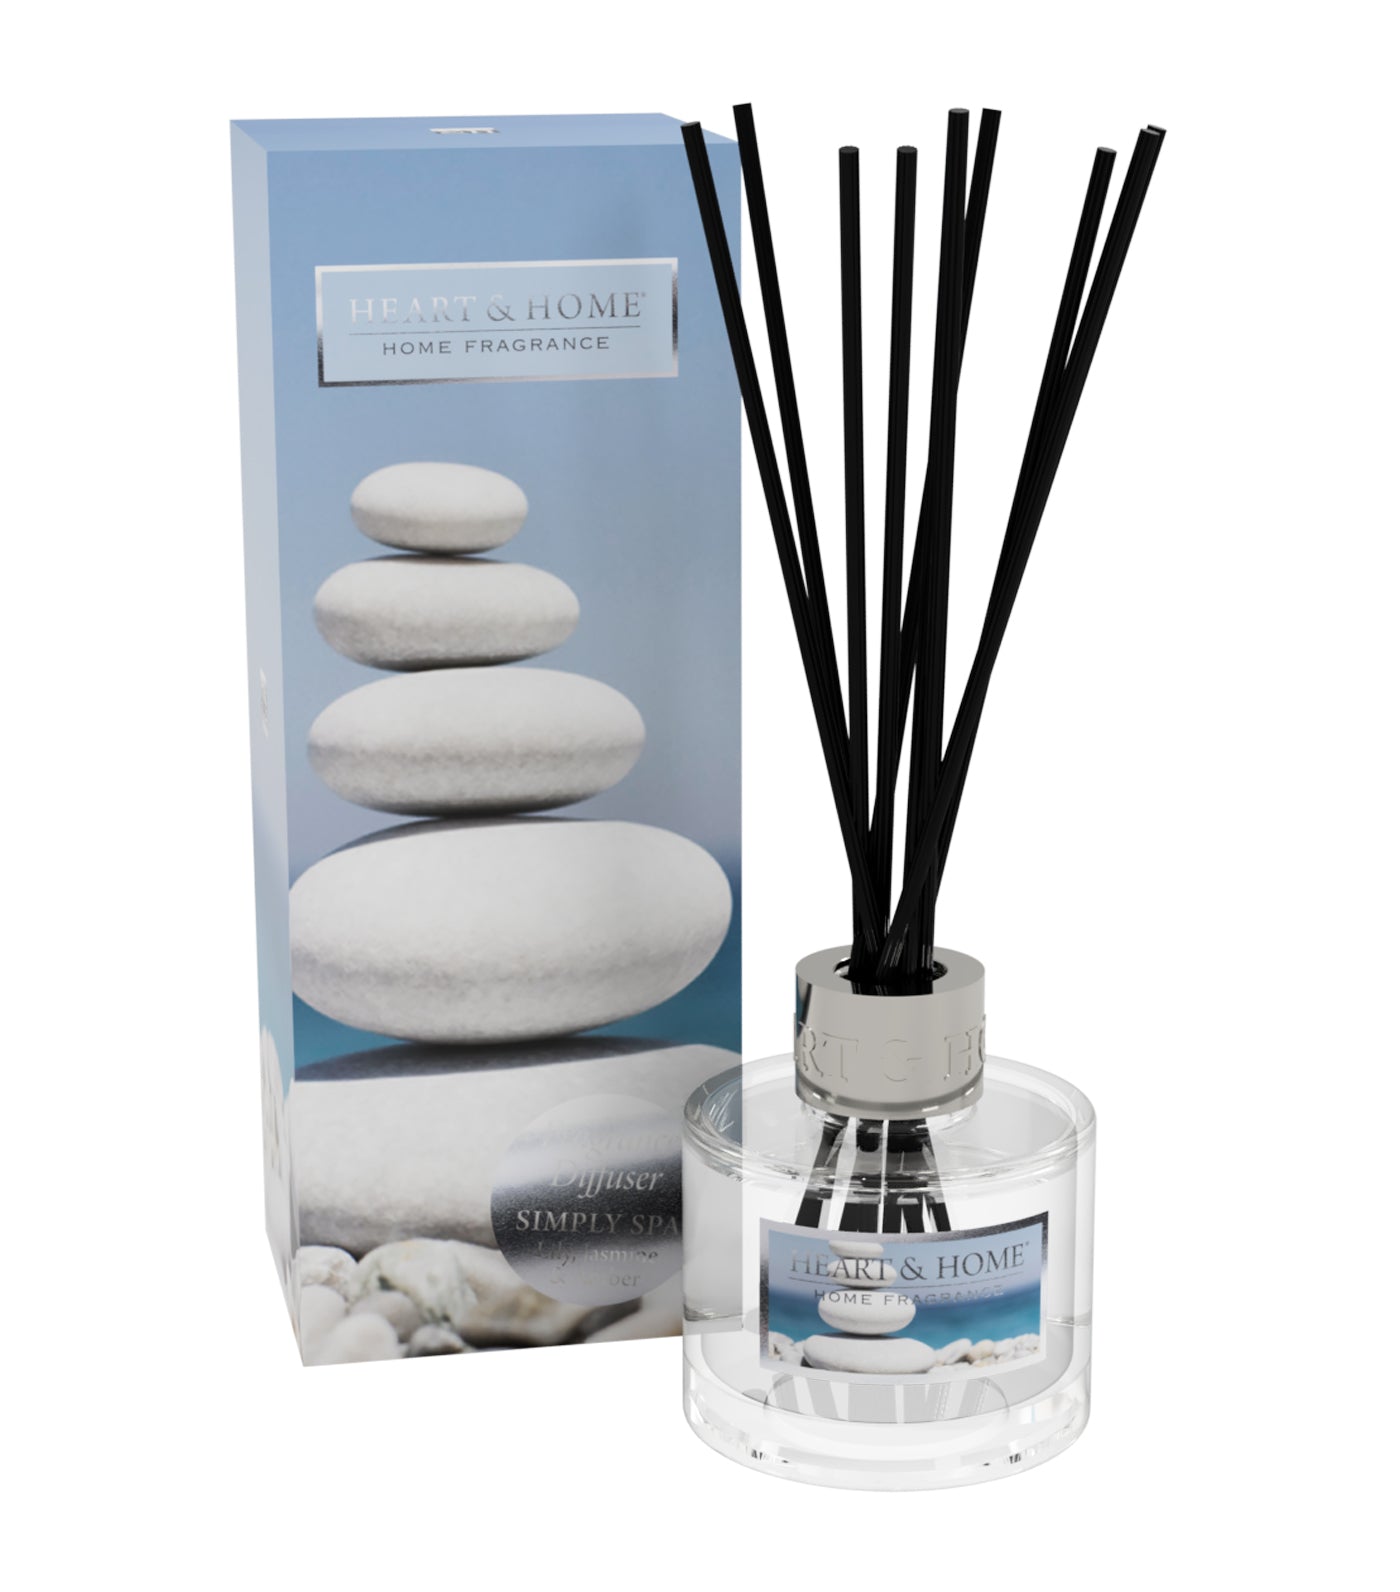 heart & home simply spa - fragrance diffuser